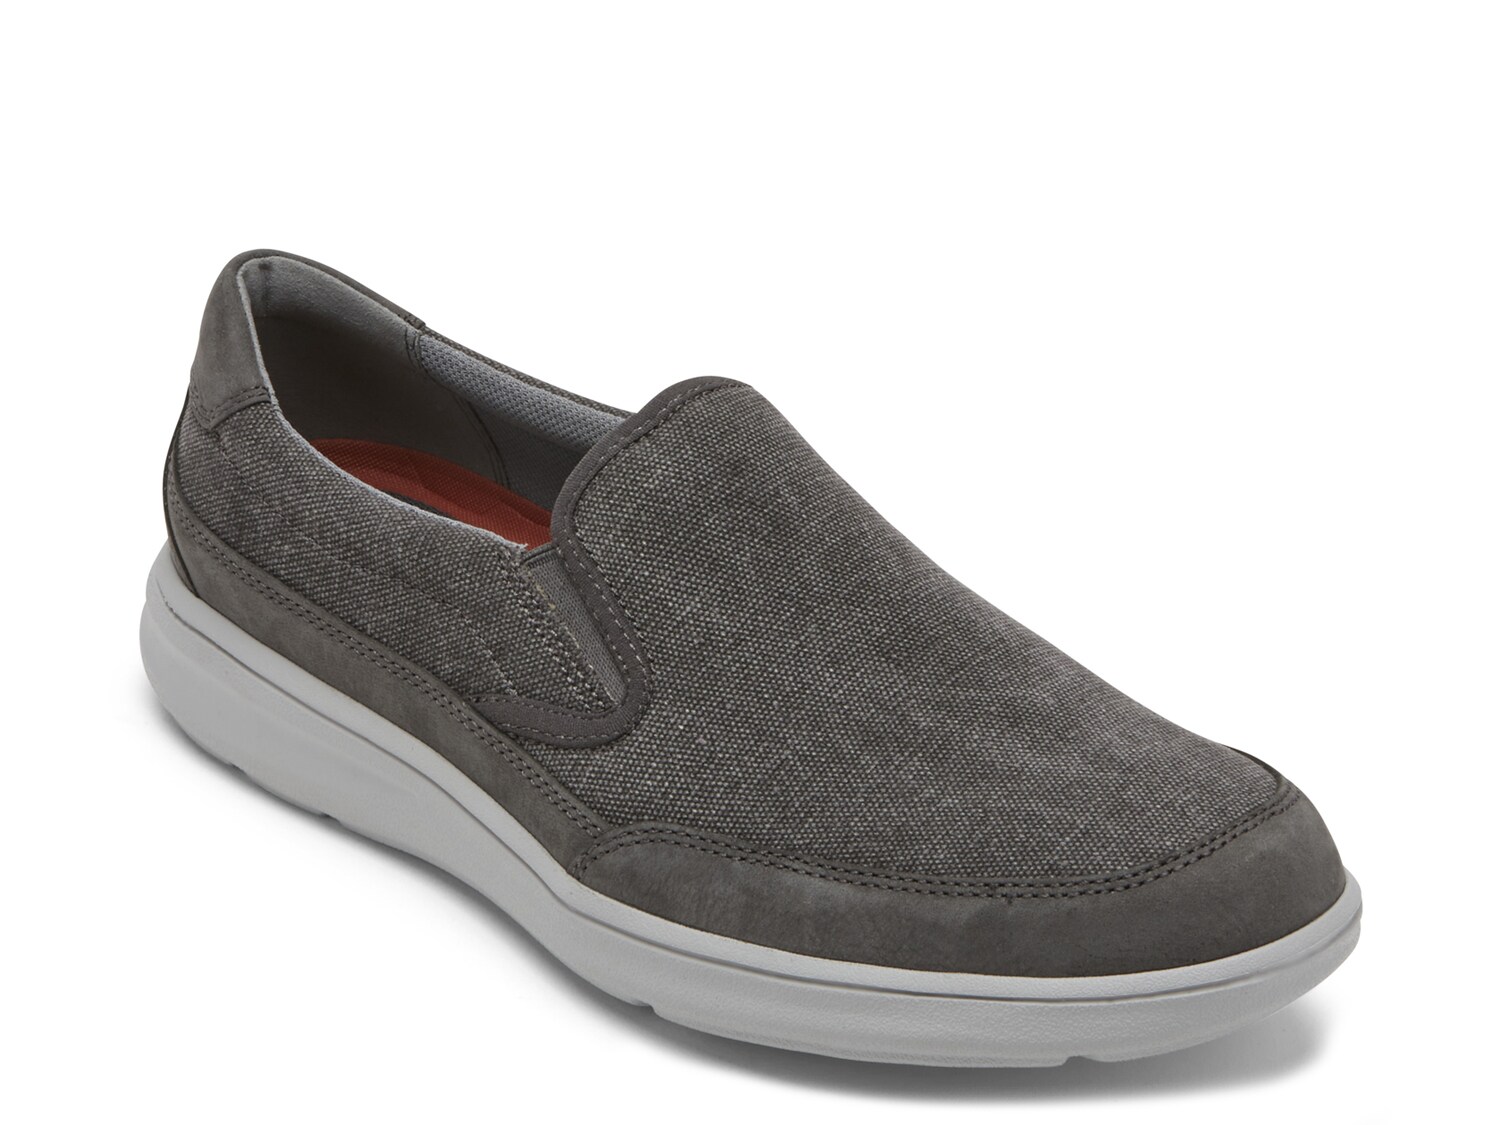  Beckwith Slip-On Sneaker 